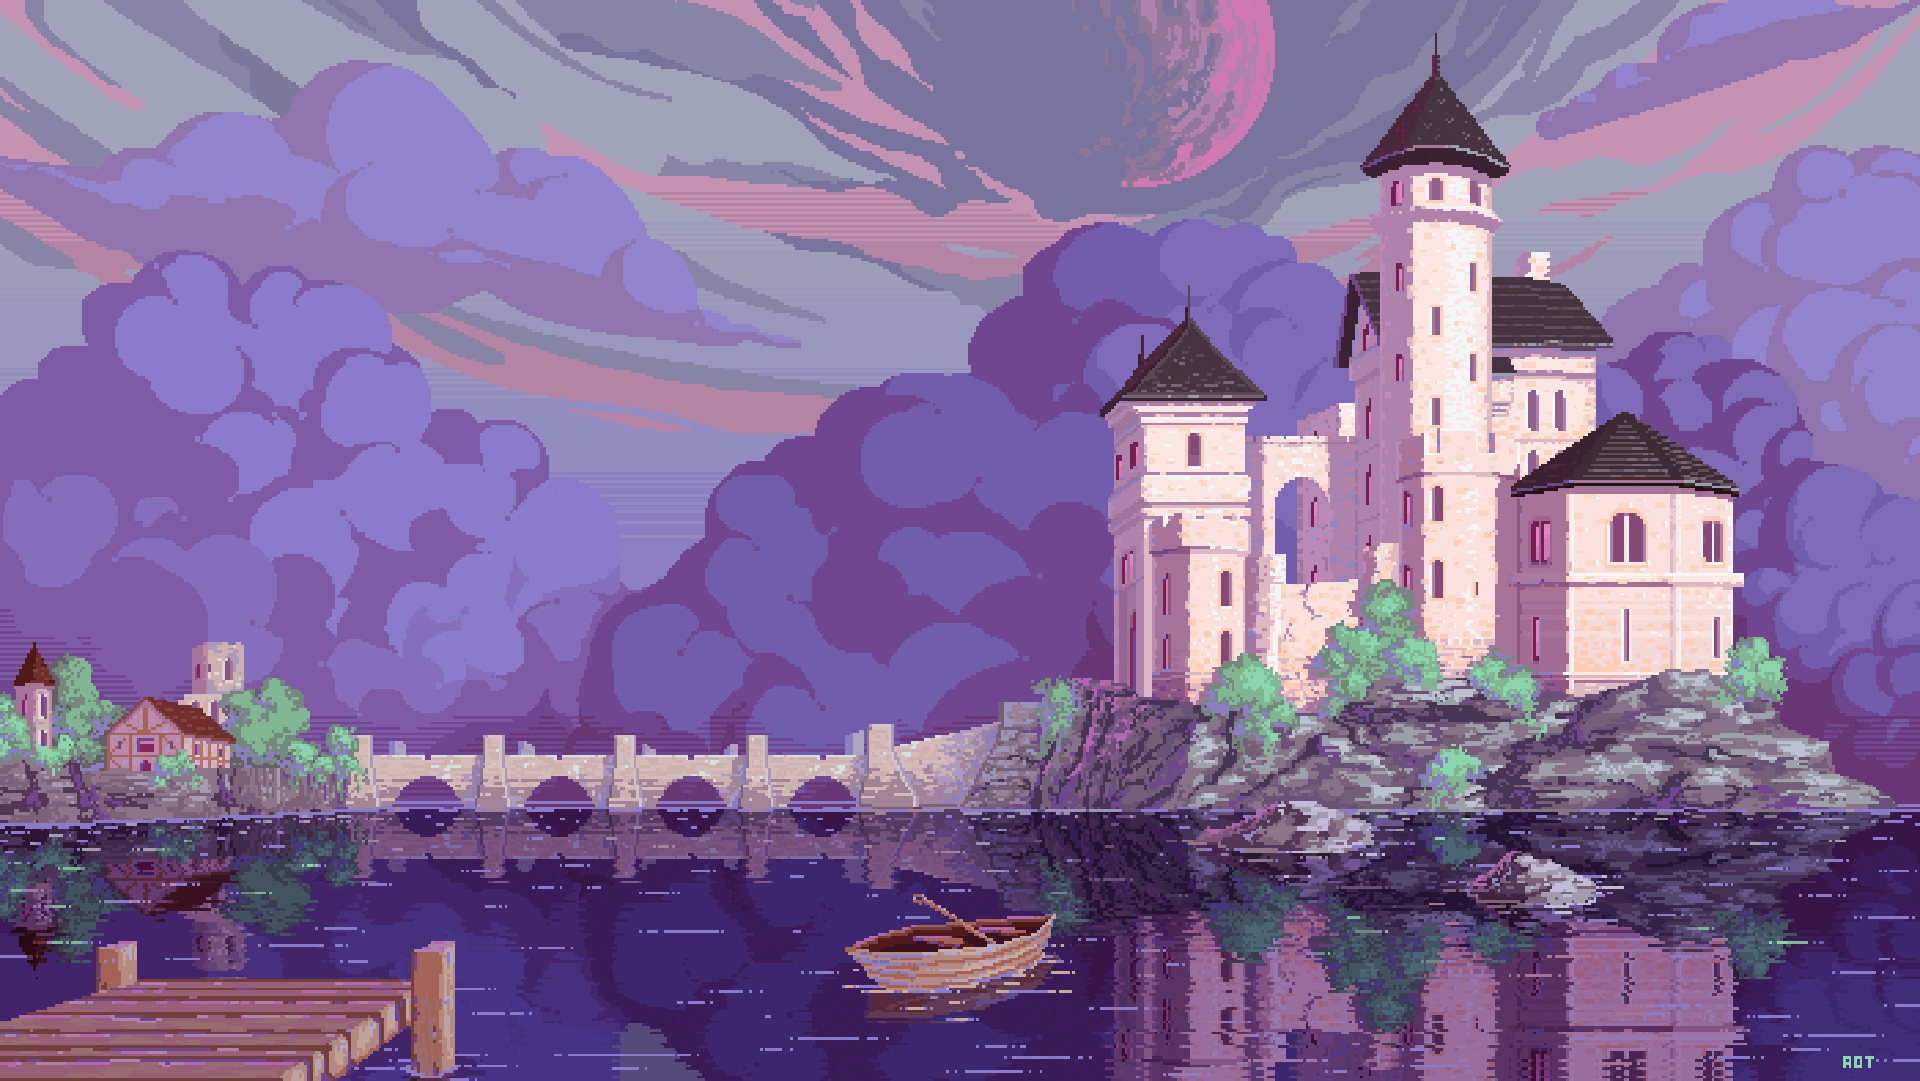 160+ Artistic Pixel Art HD Wallpapers and Backgrounds